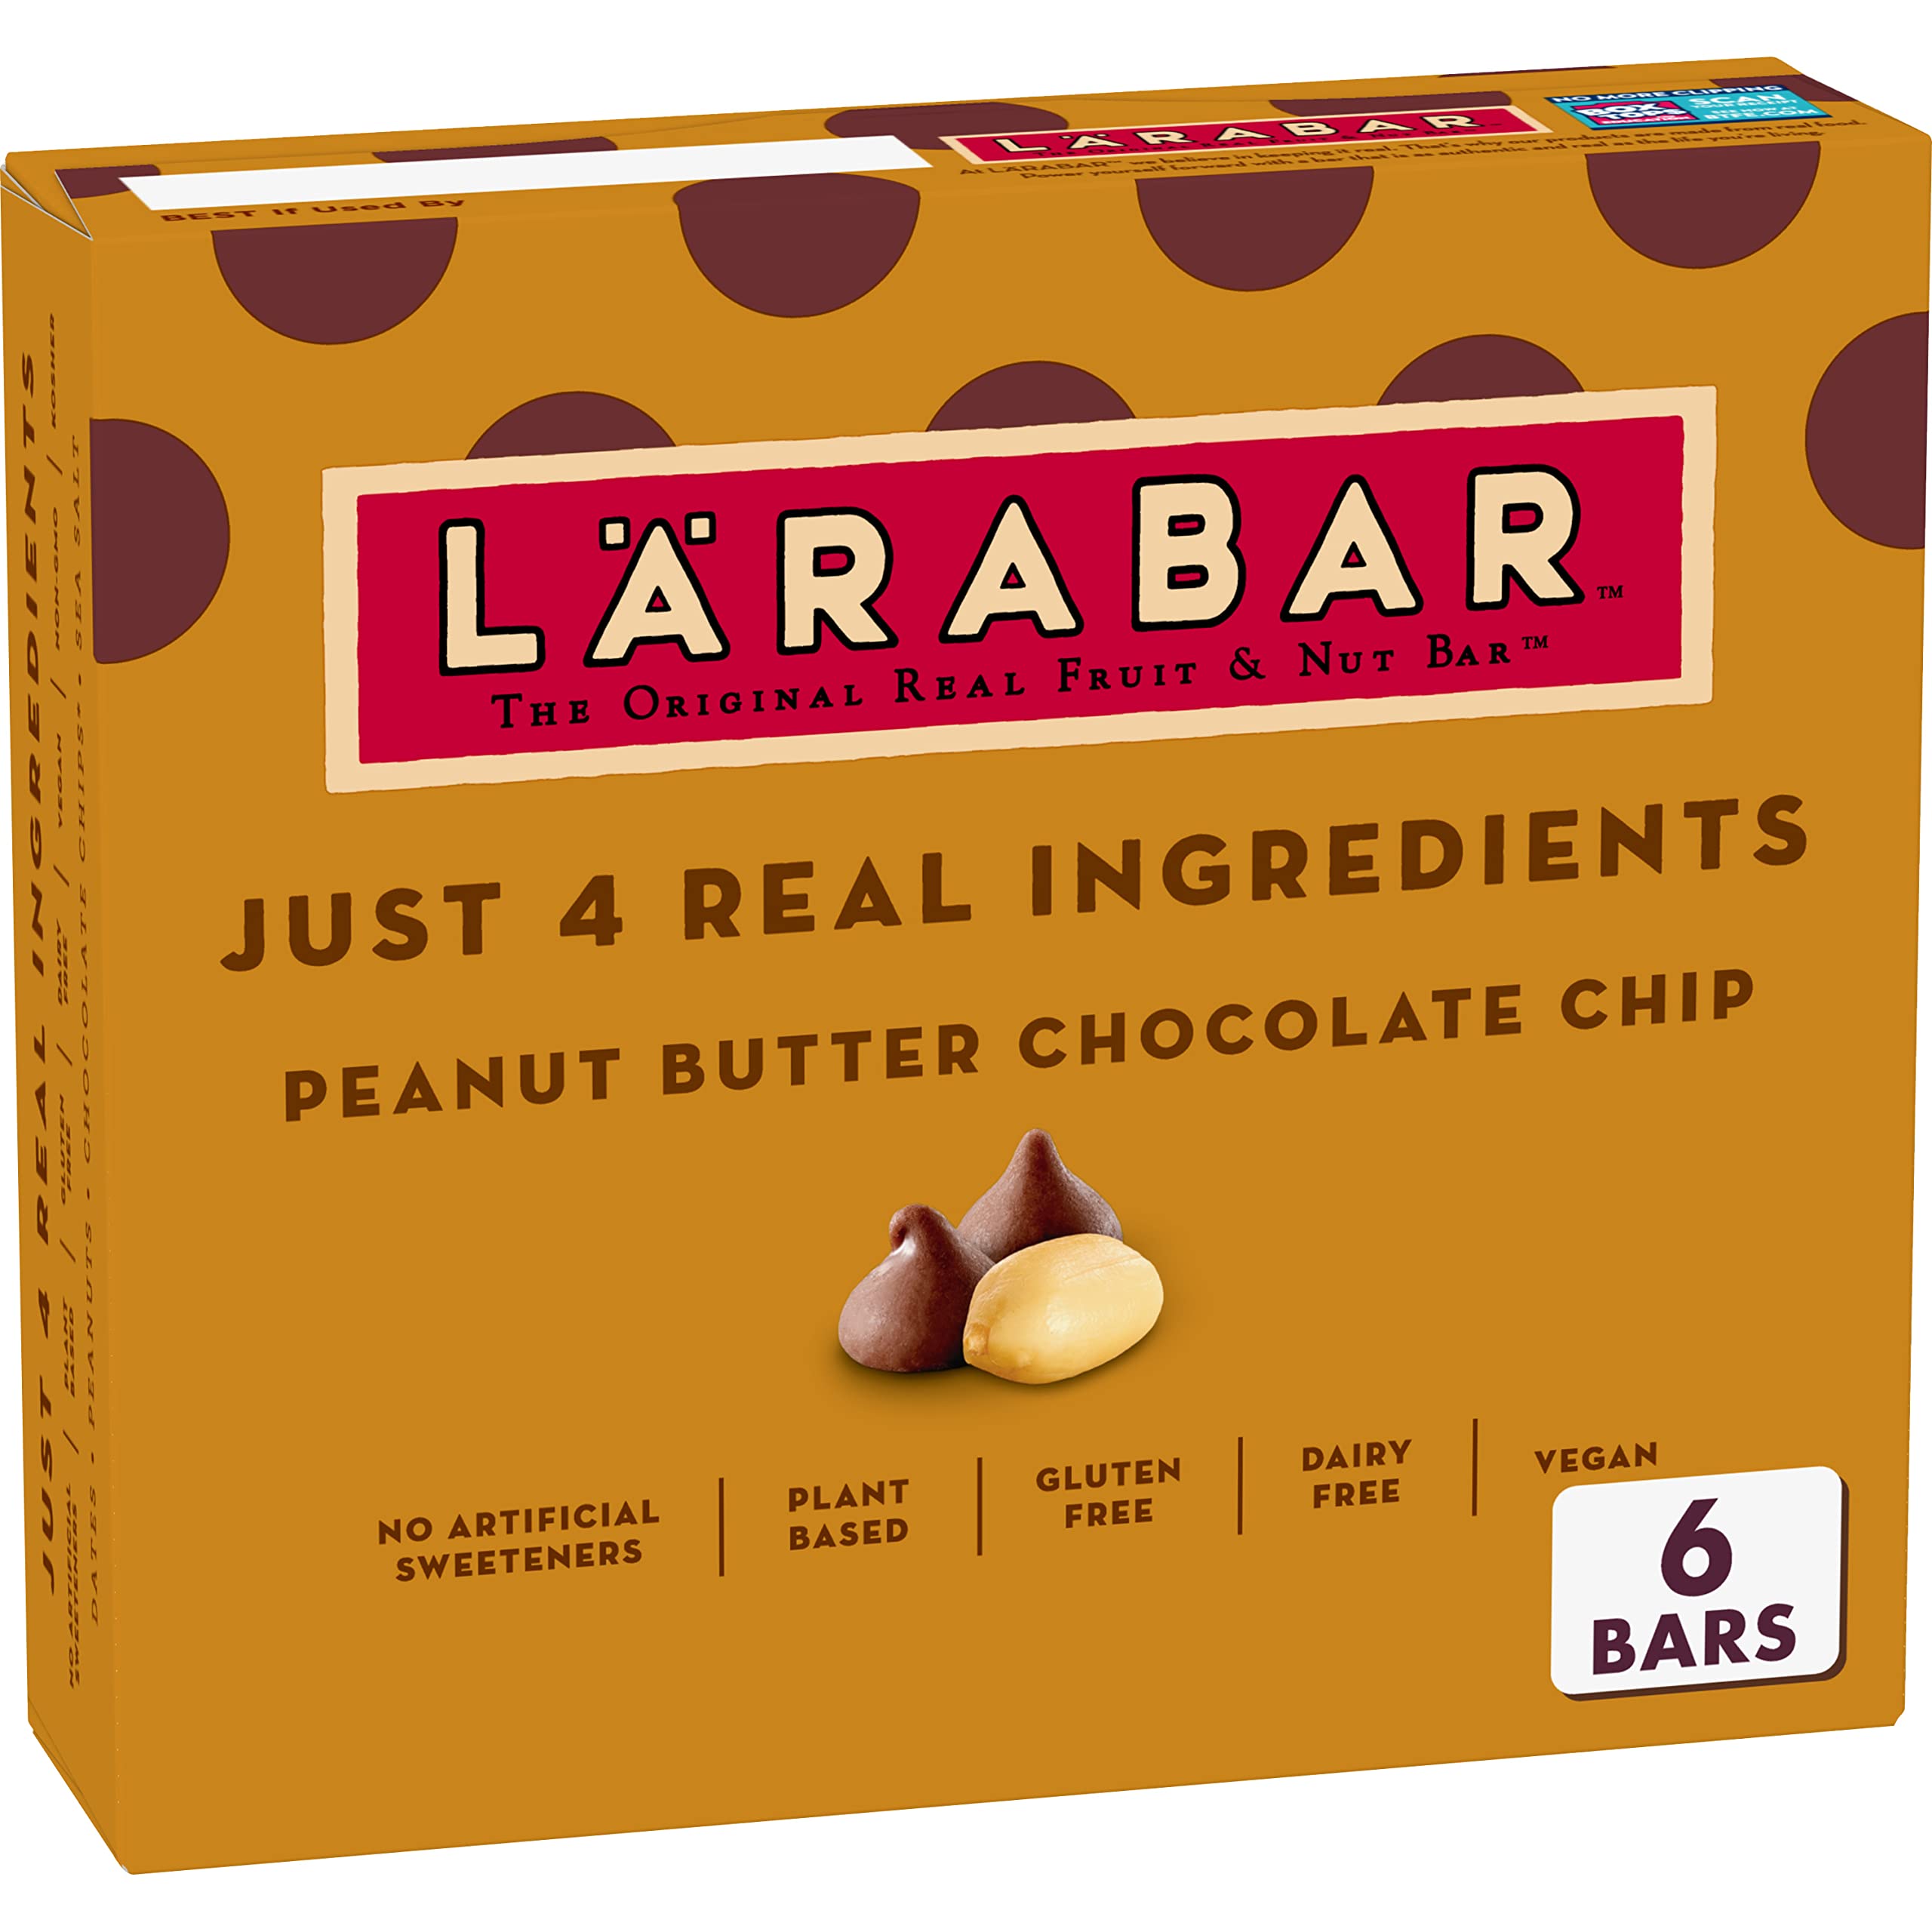 6-Count Larabar Gluten Free Bar (Peanut Butter Chocolate Chip) $3.45 w/ S&S + Free Shipping w/ Prime or on $35+